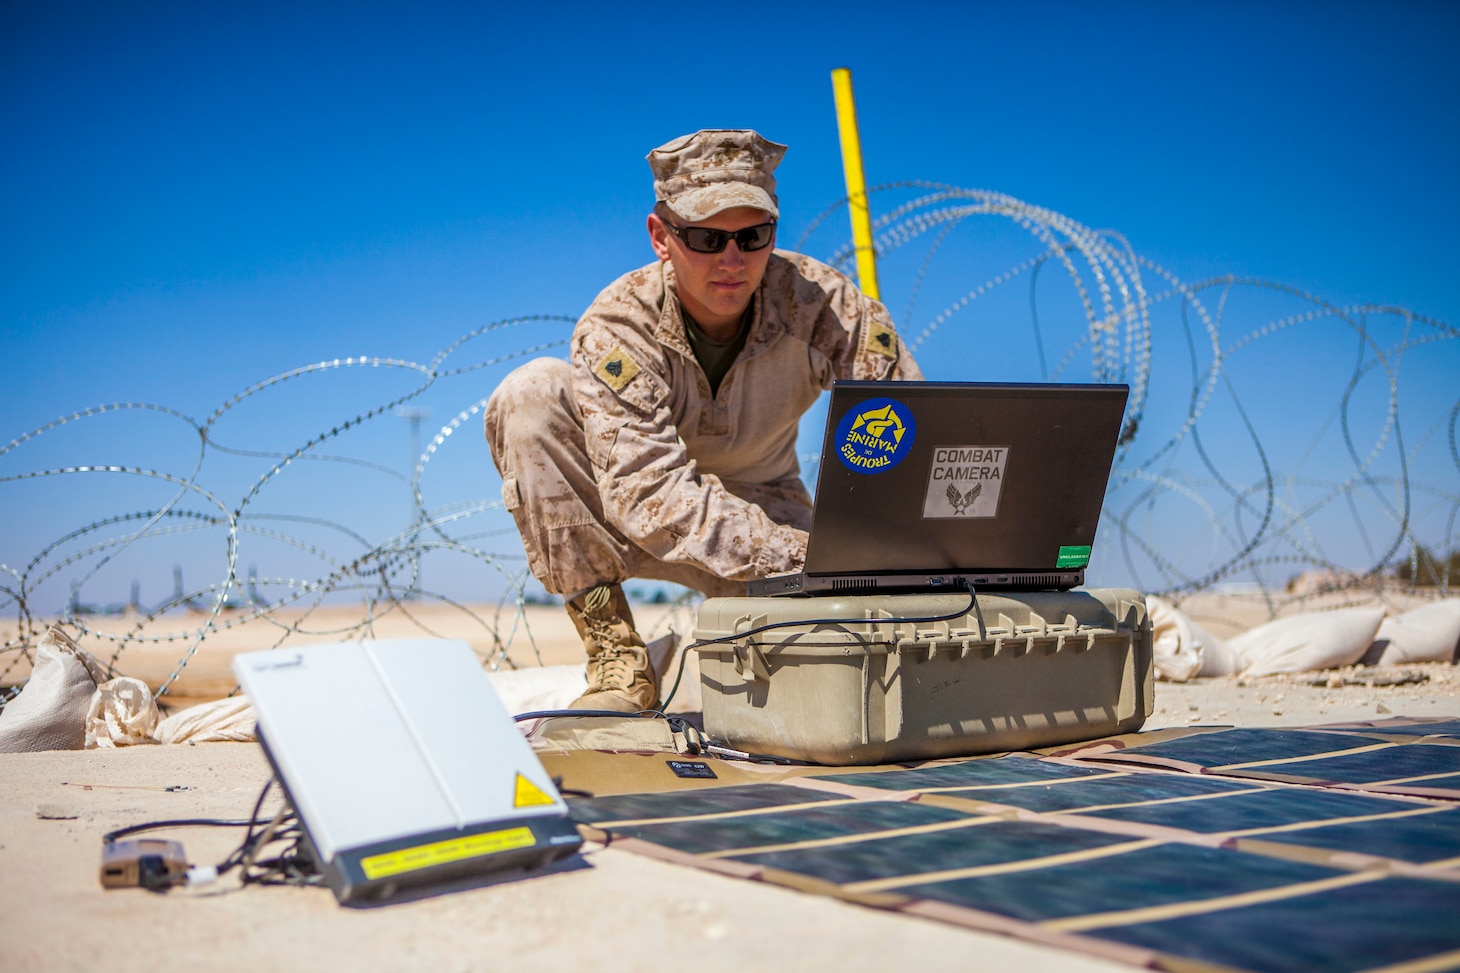 U.S. Marine Sgt. Christopher Q. Stone, 26th Marine Expeditionary Unit (MEU) combat cameraman, transmits imagery using a Broadband Global Area Network (BGAN) powered by a Solar Portable Alternative Communications Energy System (SPACES) kit from King Faisal Air Base in Jordan to the USS Kearsarge (LHD 3) at sea, June 18, 2013. Exercise Eager Lion 2013 is an annual, multinational exercise designed to strengthen military-to-military relationships and enhance security and stability in the region by responding to modern-day security scenarios. The 26th MEU is a Marine Air-Ground Task Force forward-deployed to the U.S. 5th Fleet area of responsibility aboard the Kearsarge Amphibious Ready Group serving as a sea-based, expeditionary crisis response force capable of conducting amphibious operations across the full range of military operations. (U.S. Marine Corps photo by Sgt. Christopher Q. Stone, 26th MEU Combat Camera/Released)